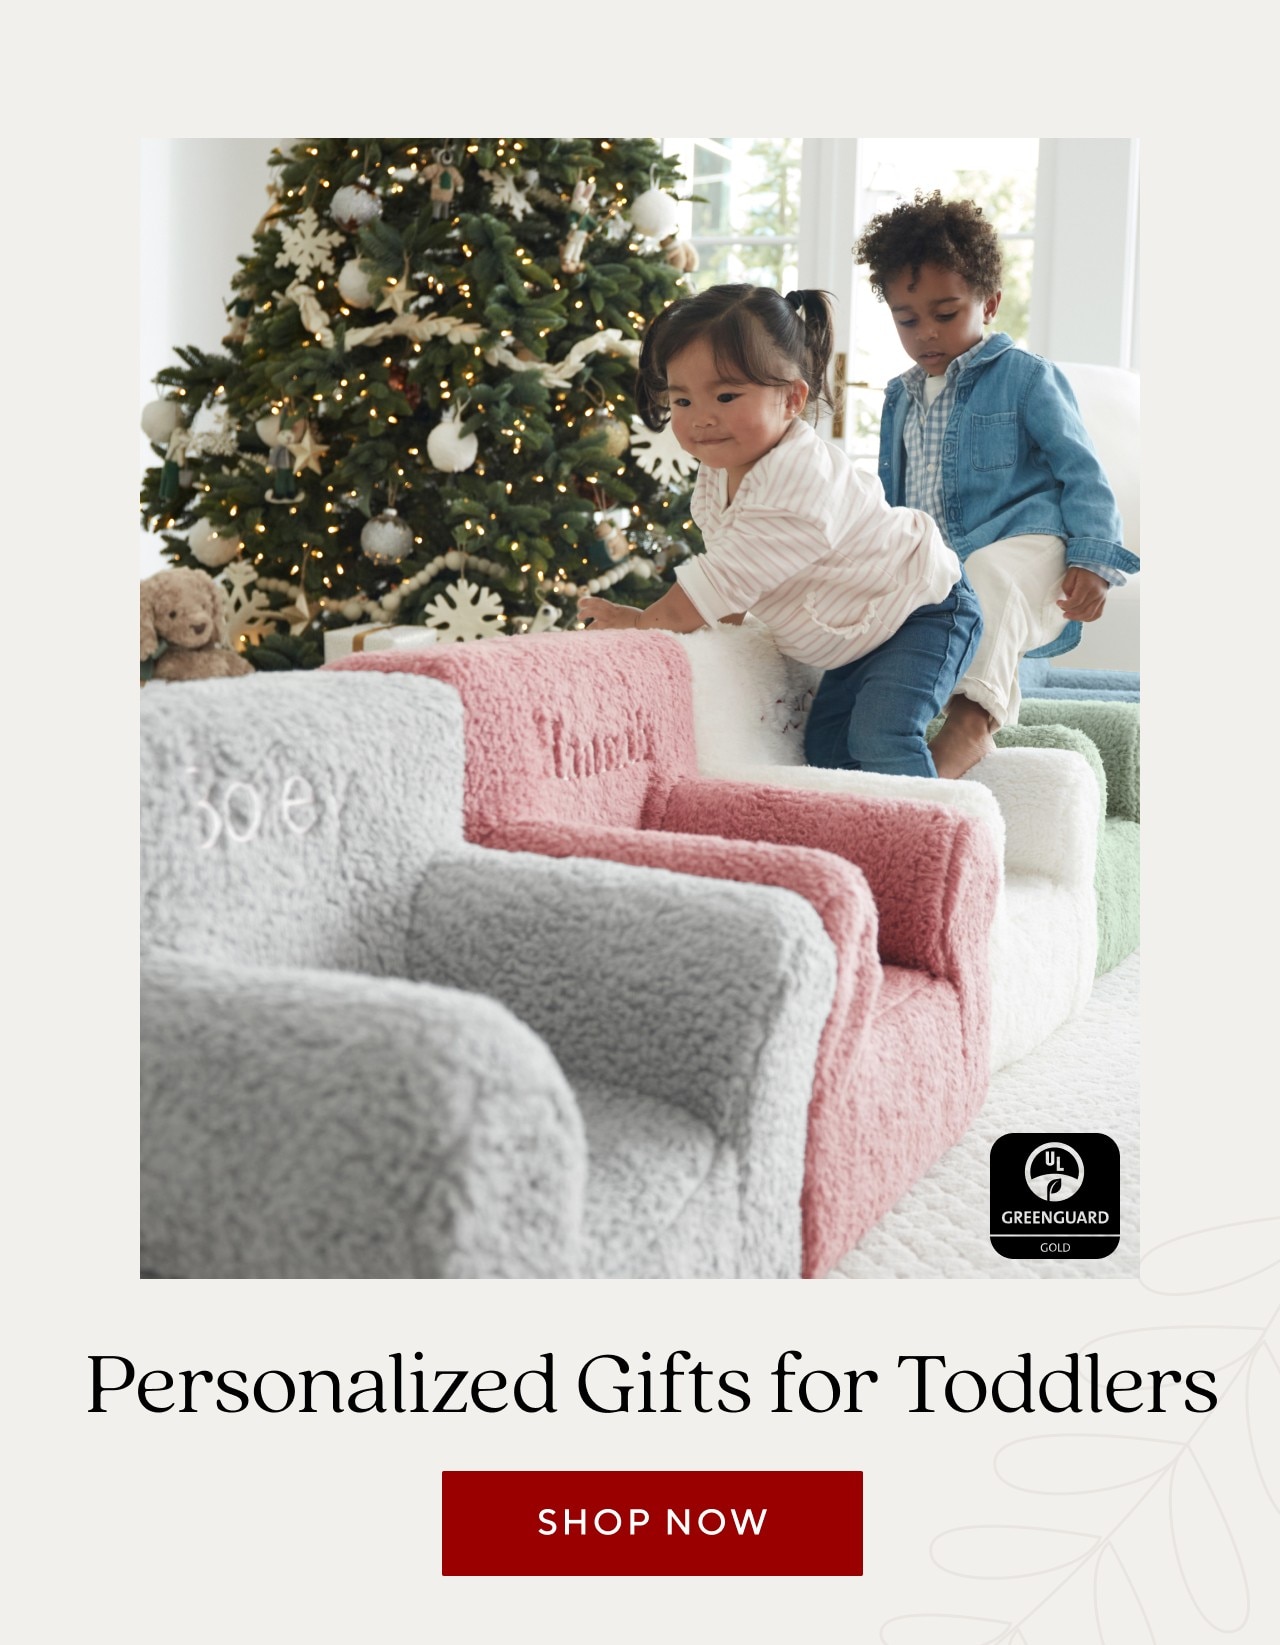 PERSONALIZED GIFTS FOR TODDLERS